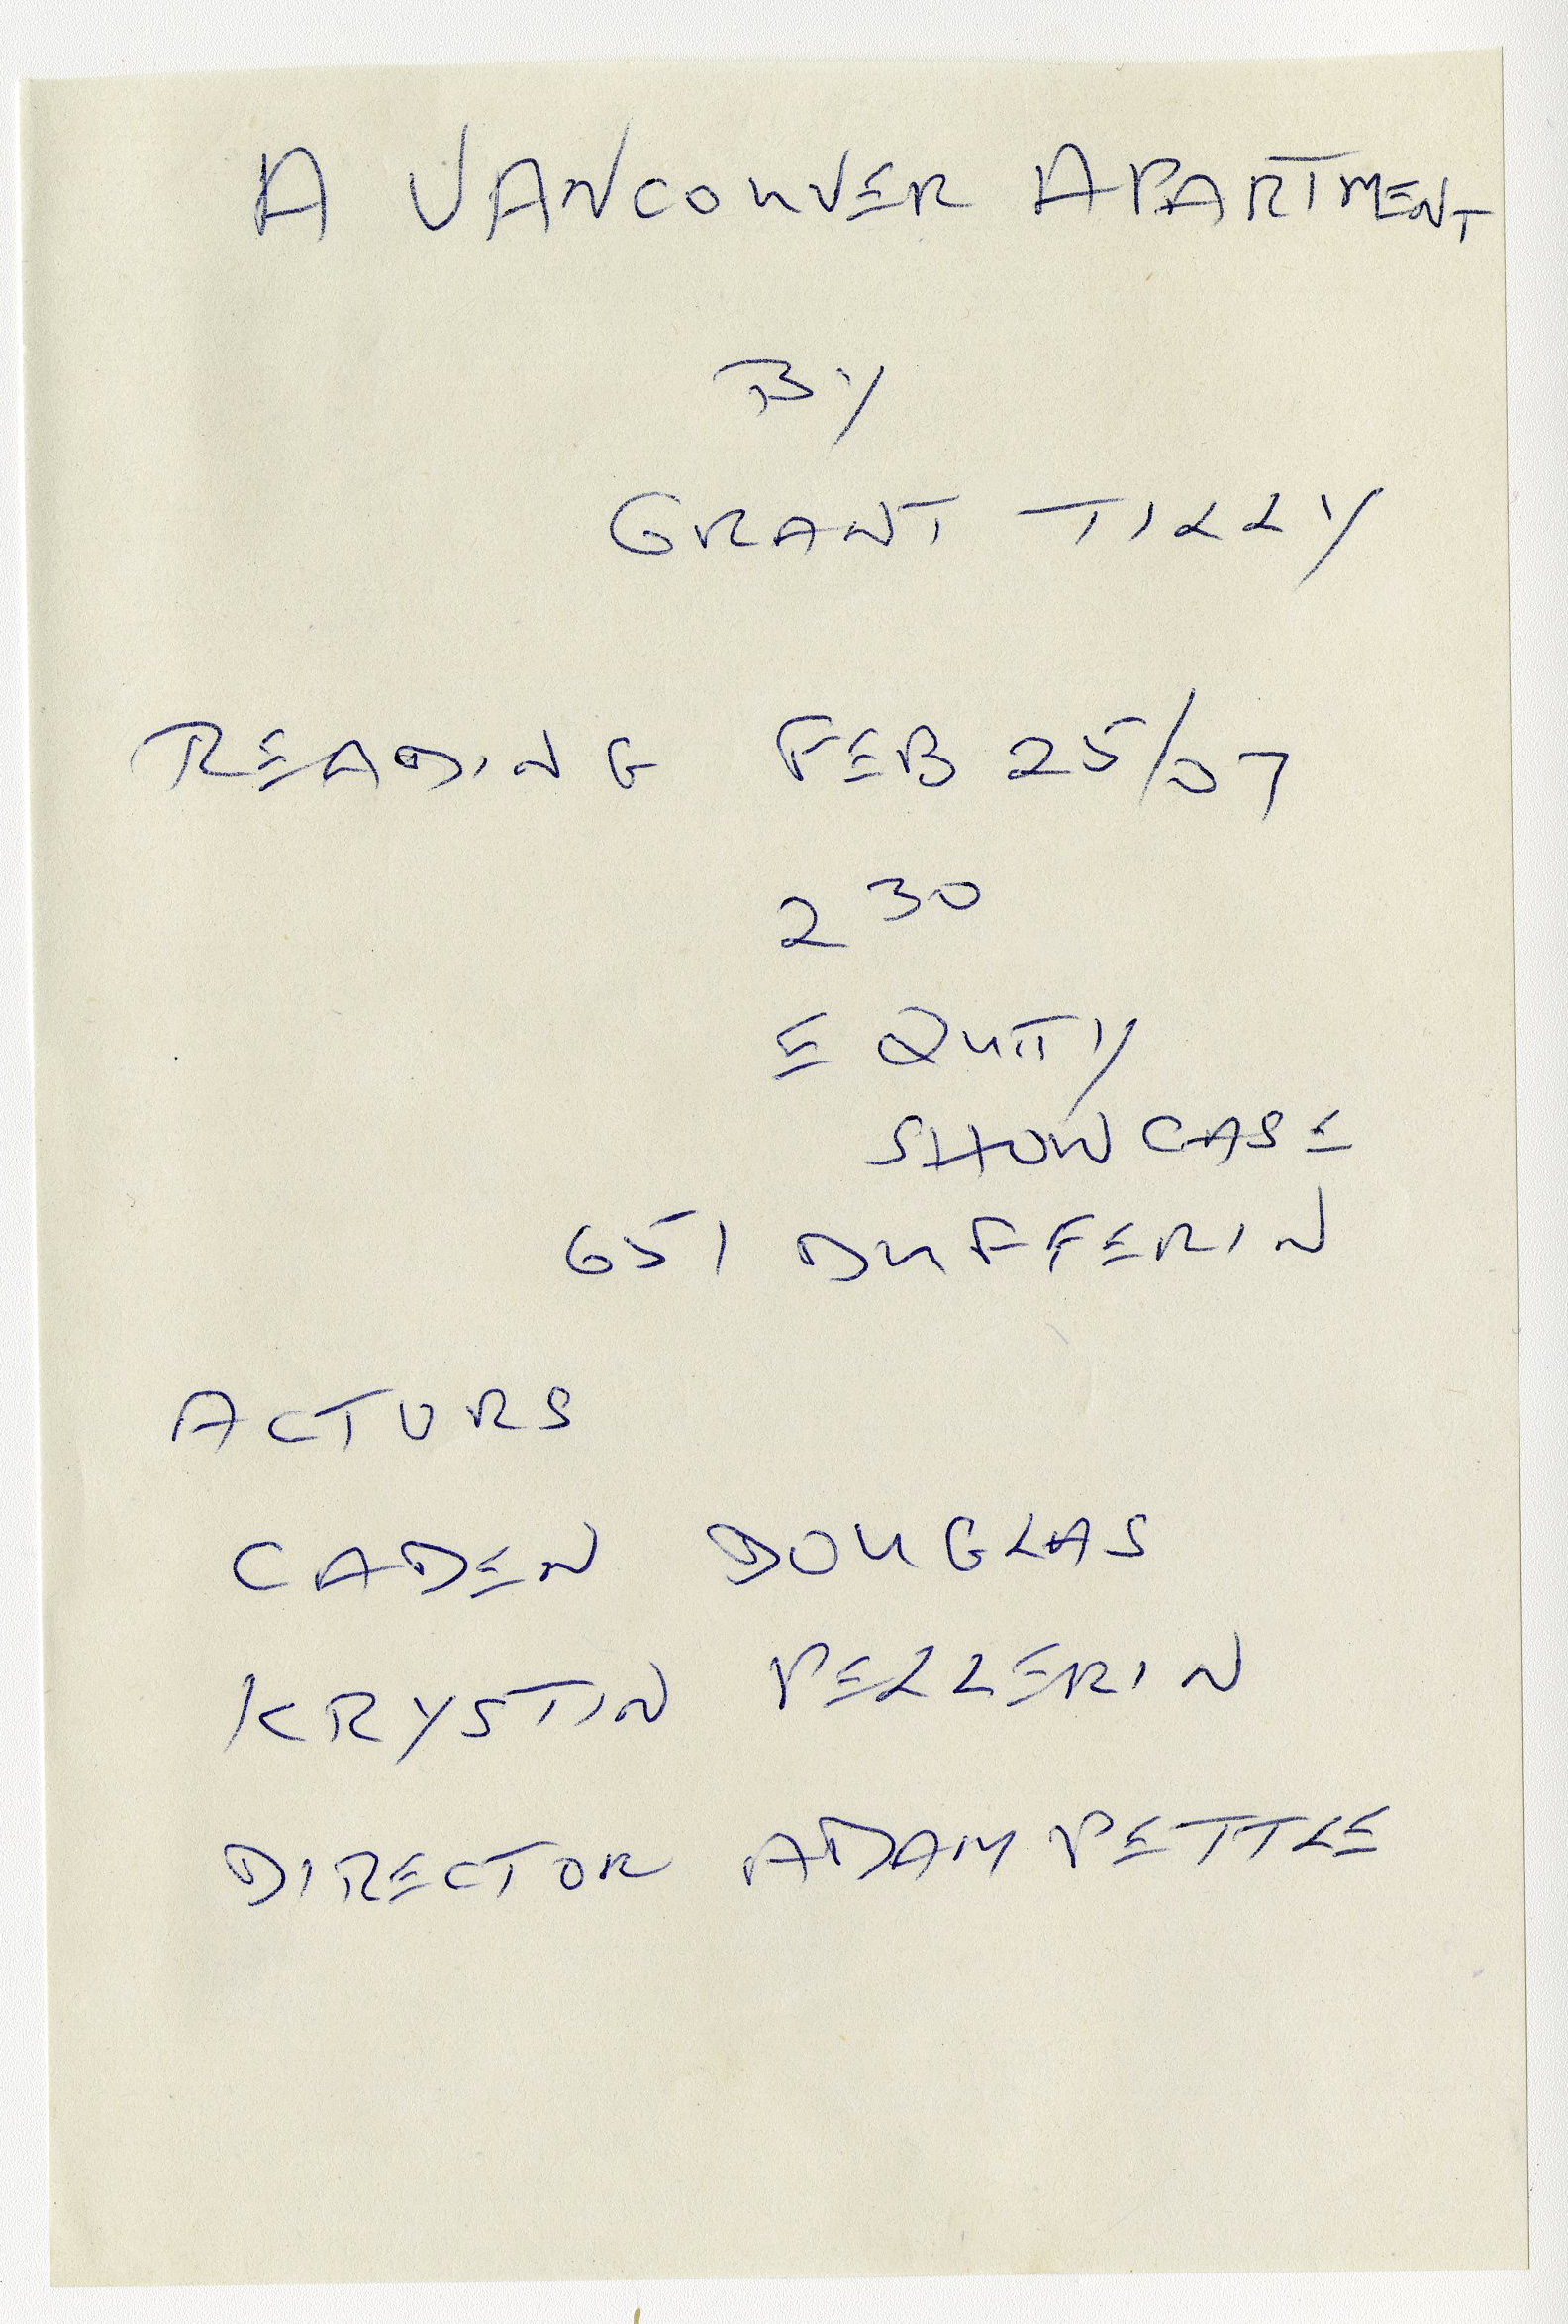 A hand-written note listing the cast members of a play.